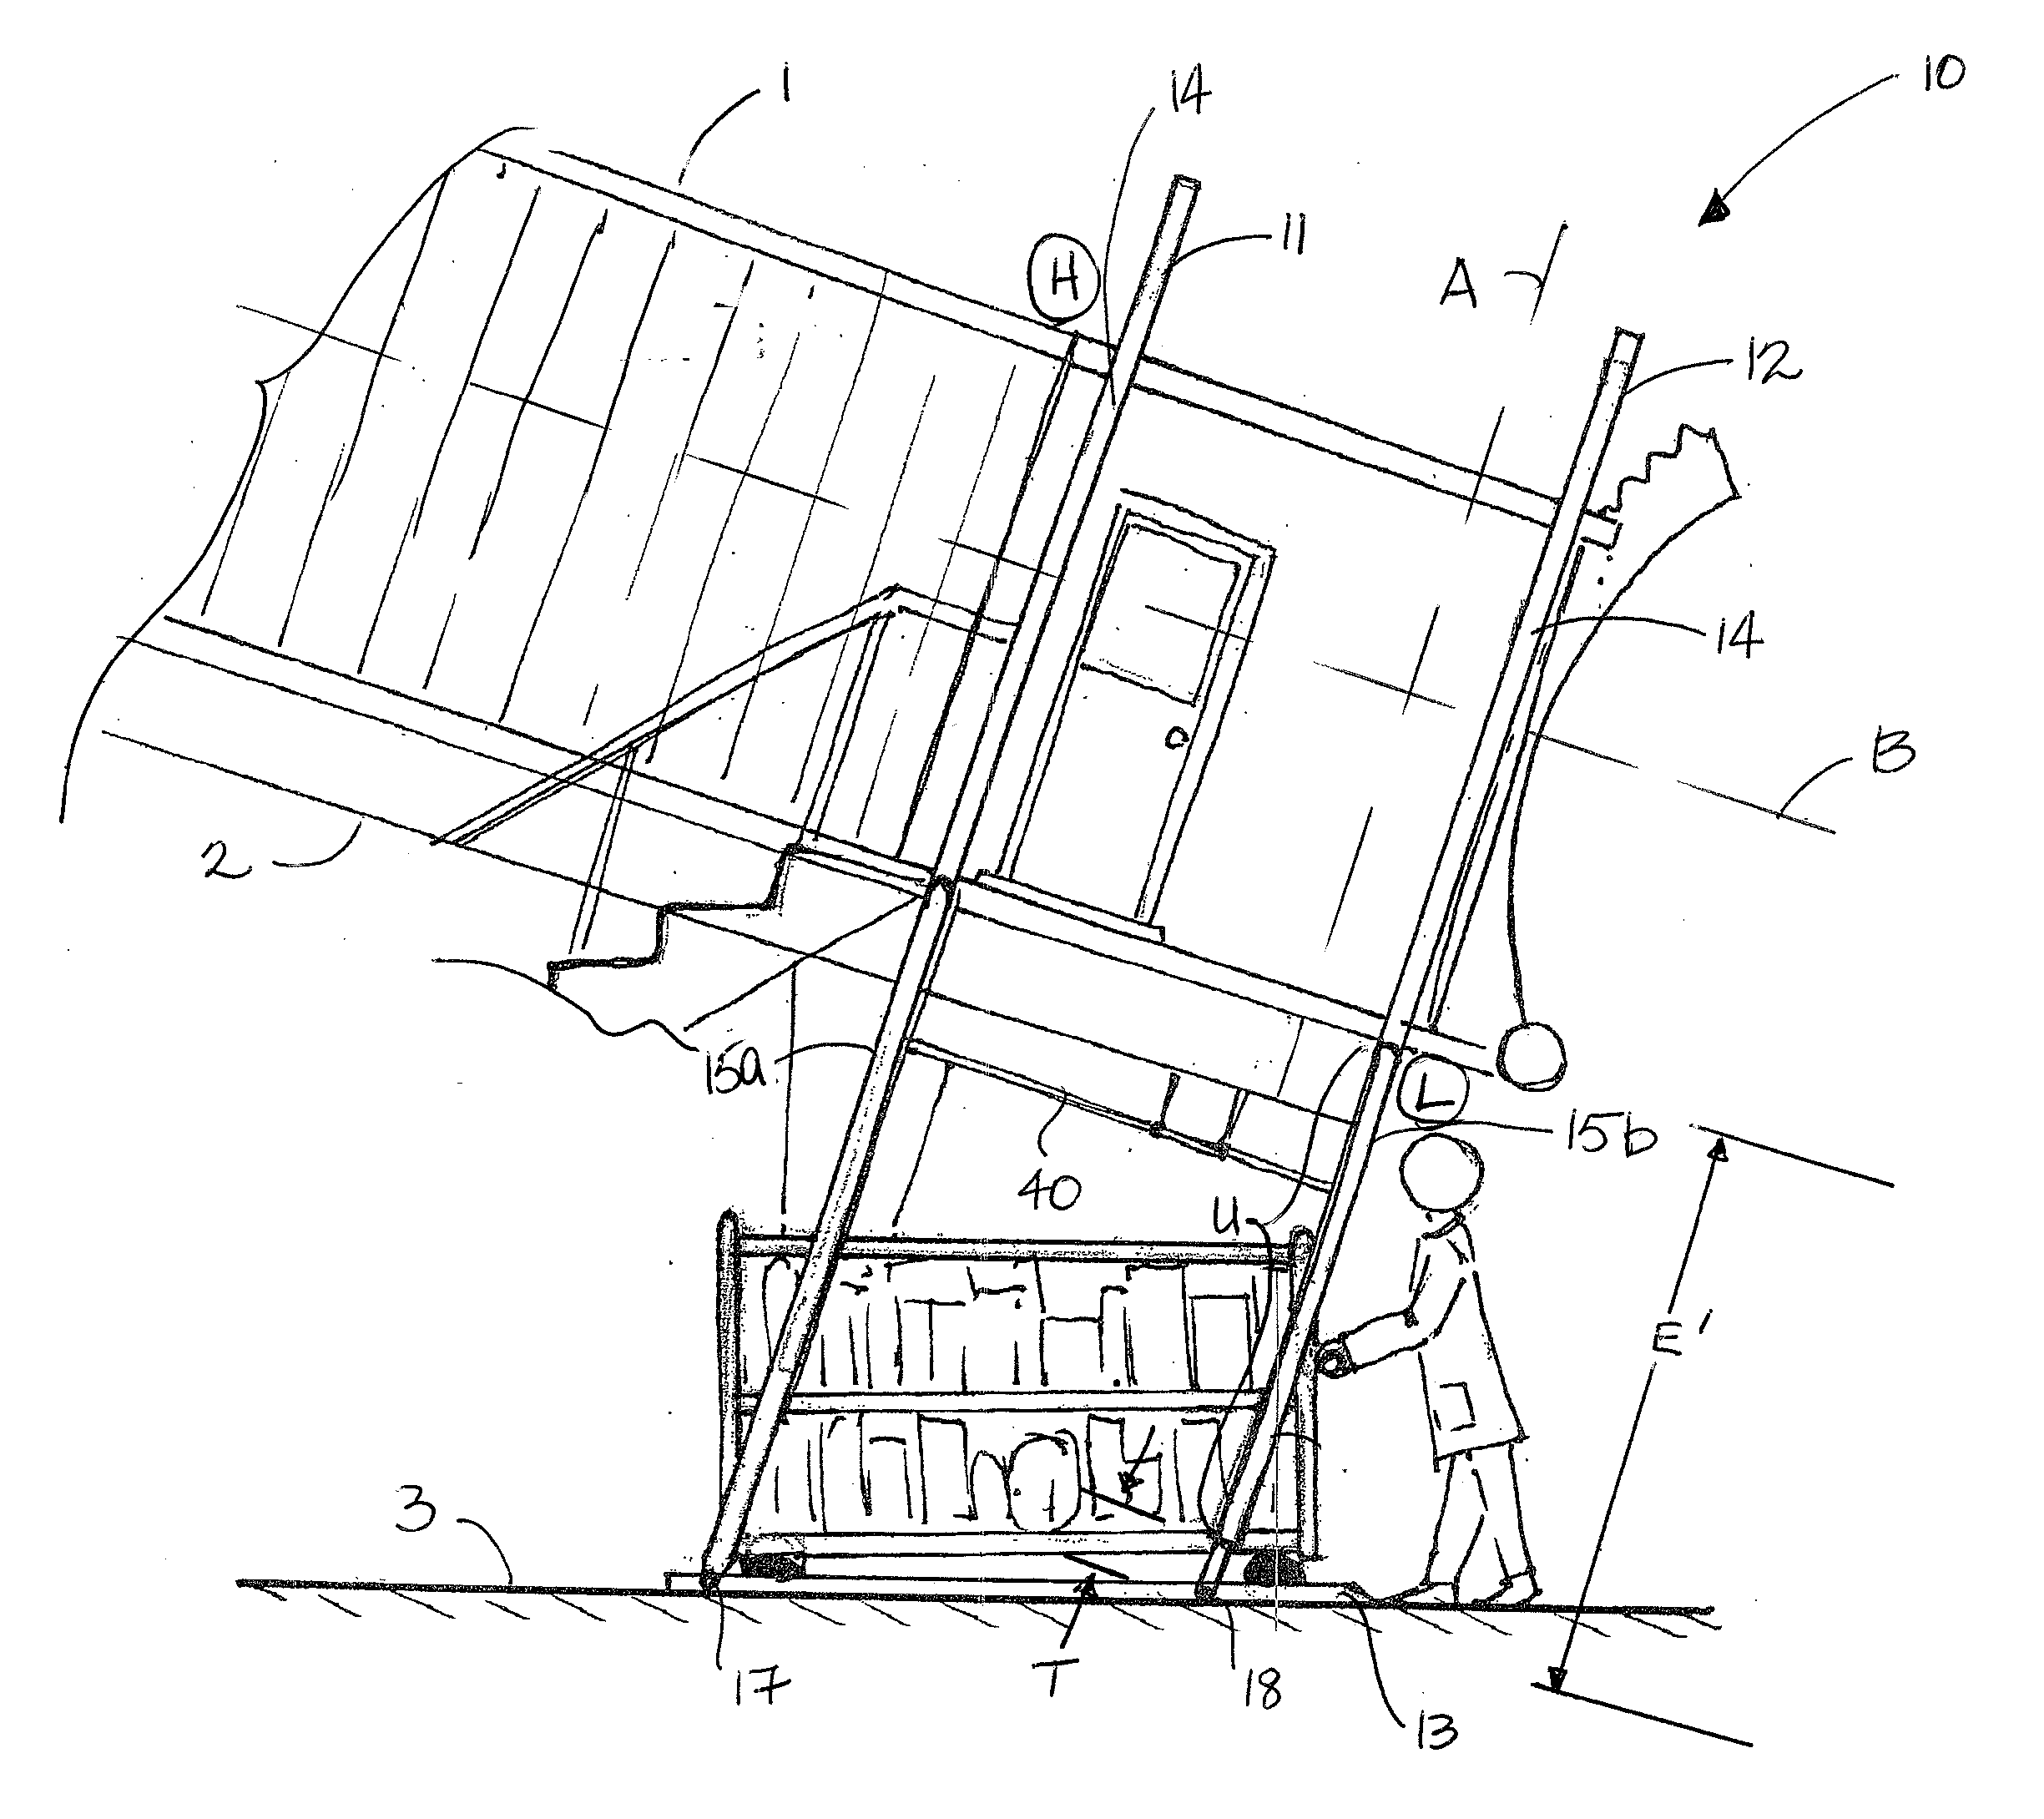 Automatic baggage lift leveling and lift system and apparatus for supporting same from a moveable structure such as a jet bridge